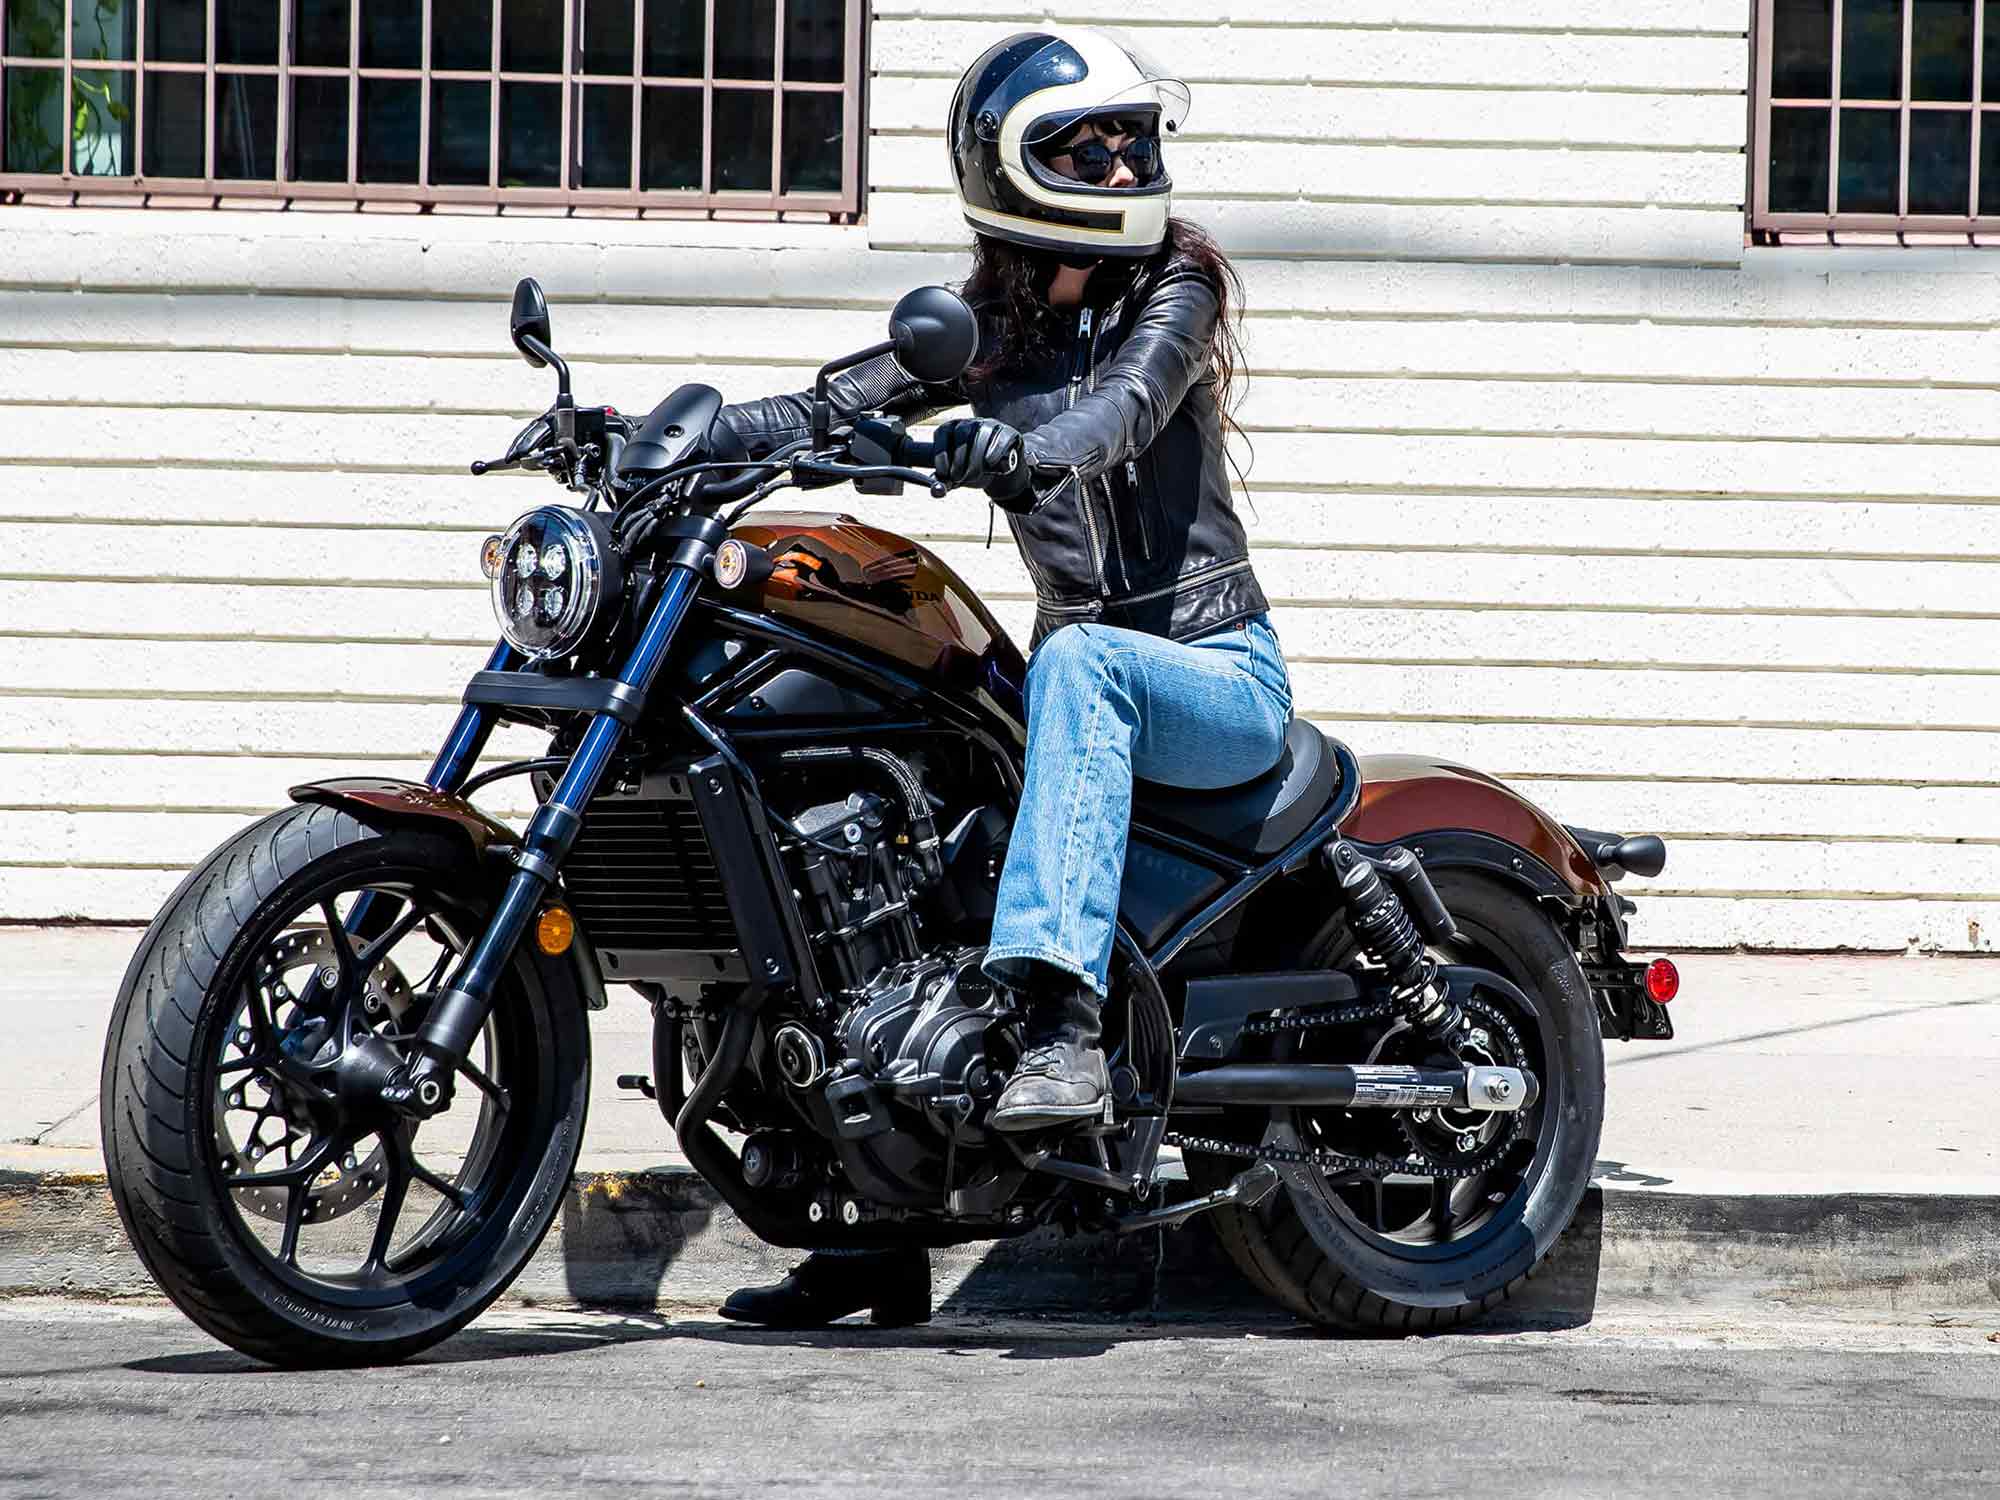 Feel the freedom of the open road with a woman motorcyclist getting ready to take off